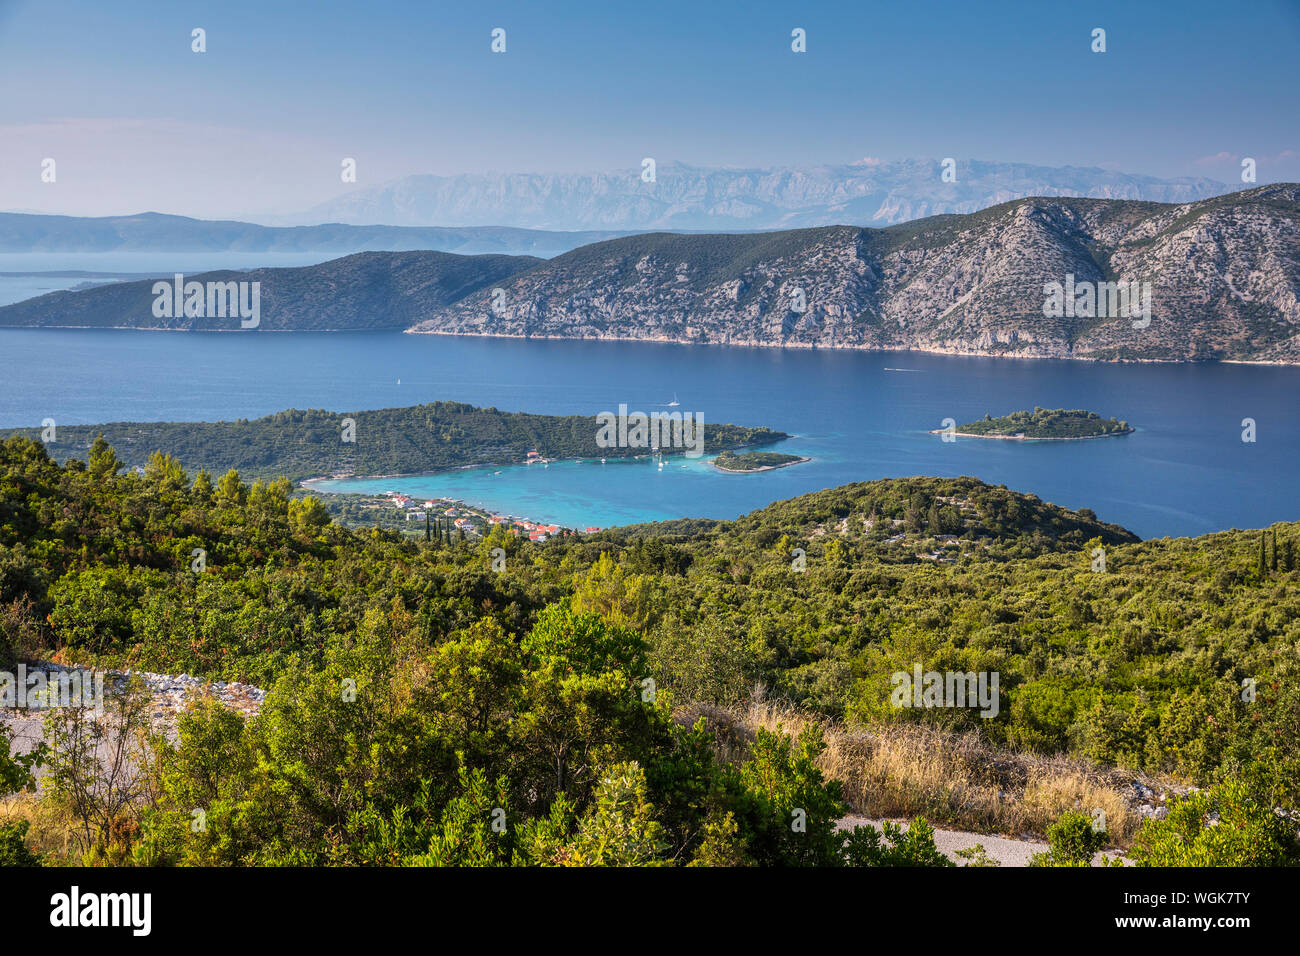 Kneza bay from the hill of Korcula island. Peninsula Peljesac on the back and Velebit mountain in a distance. Stock Photo